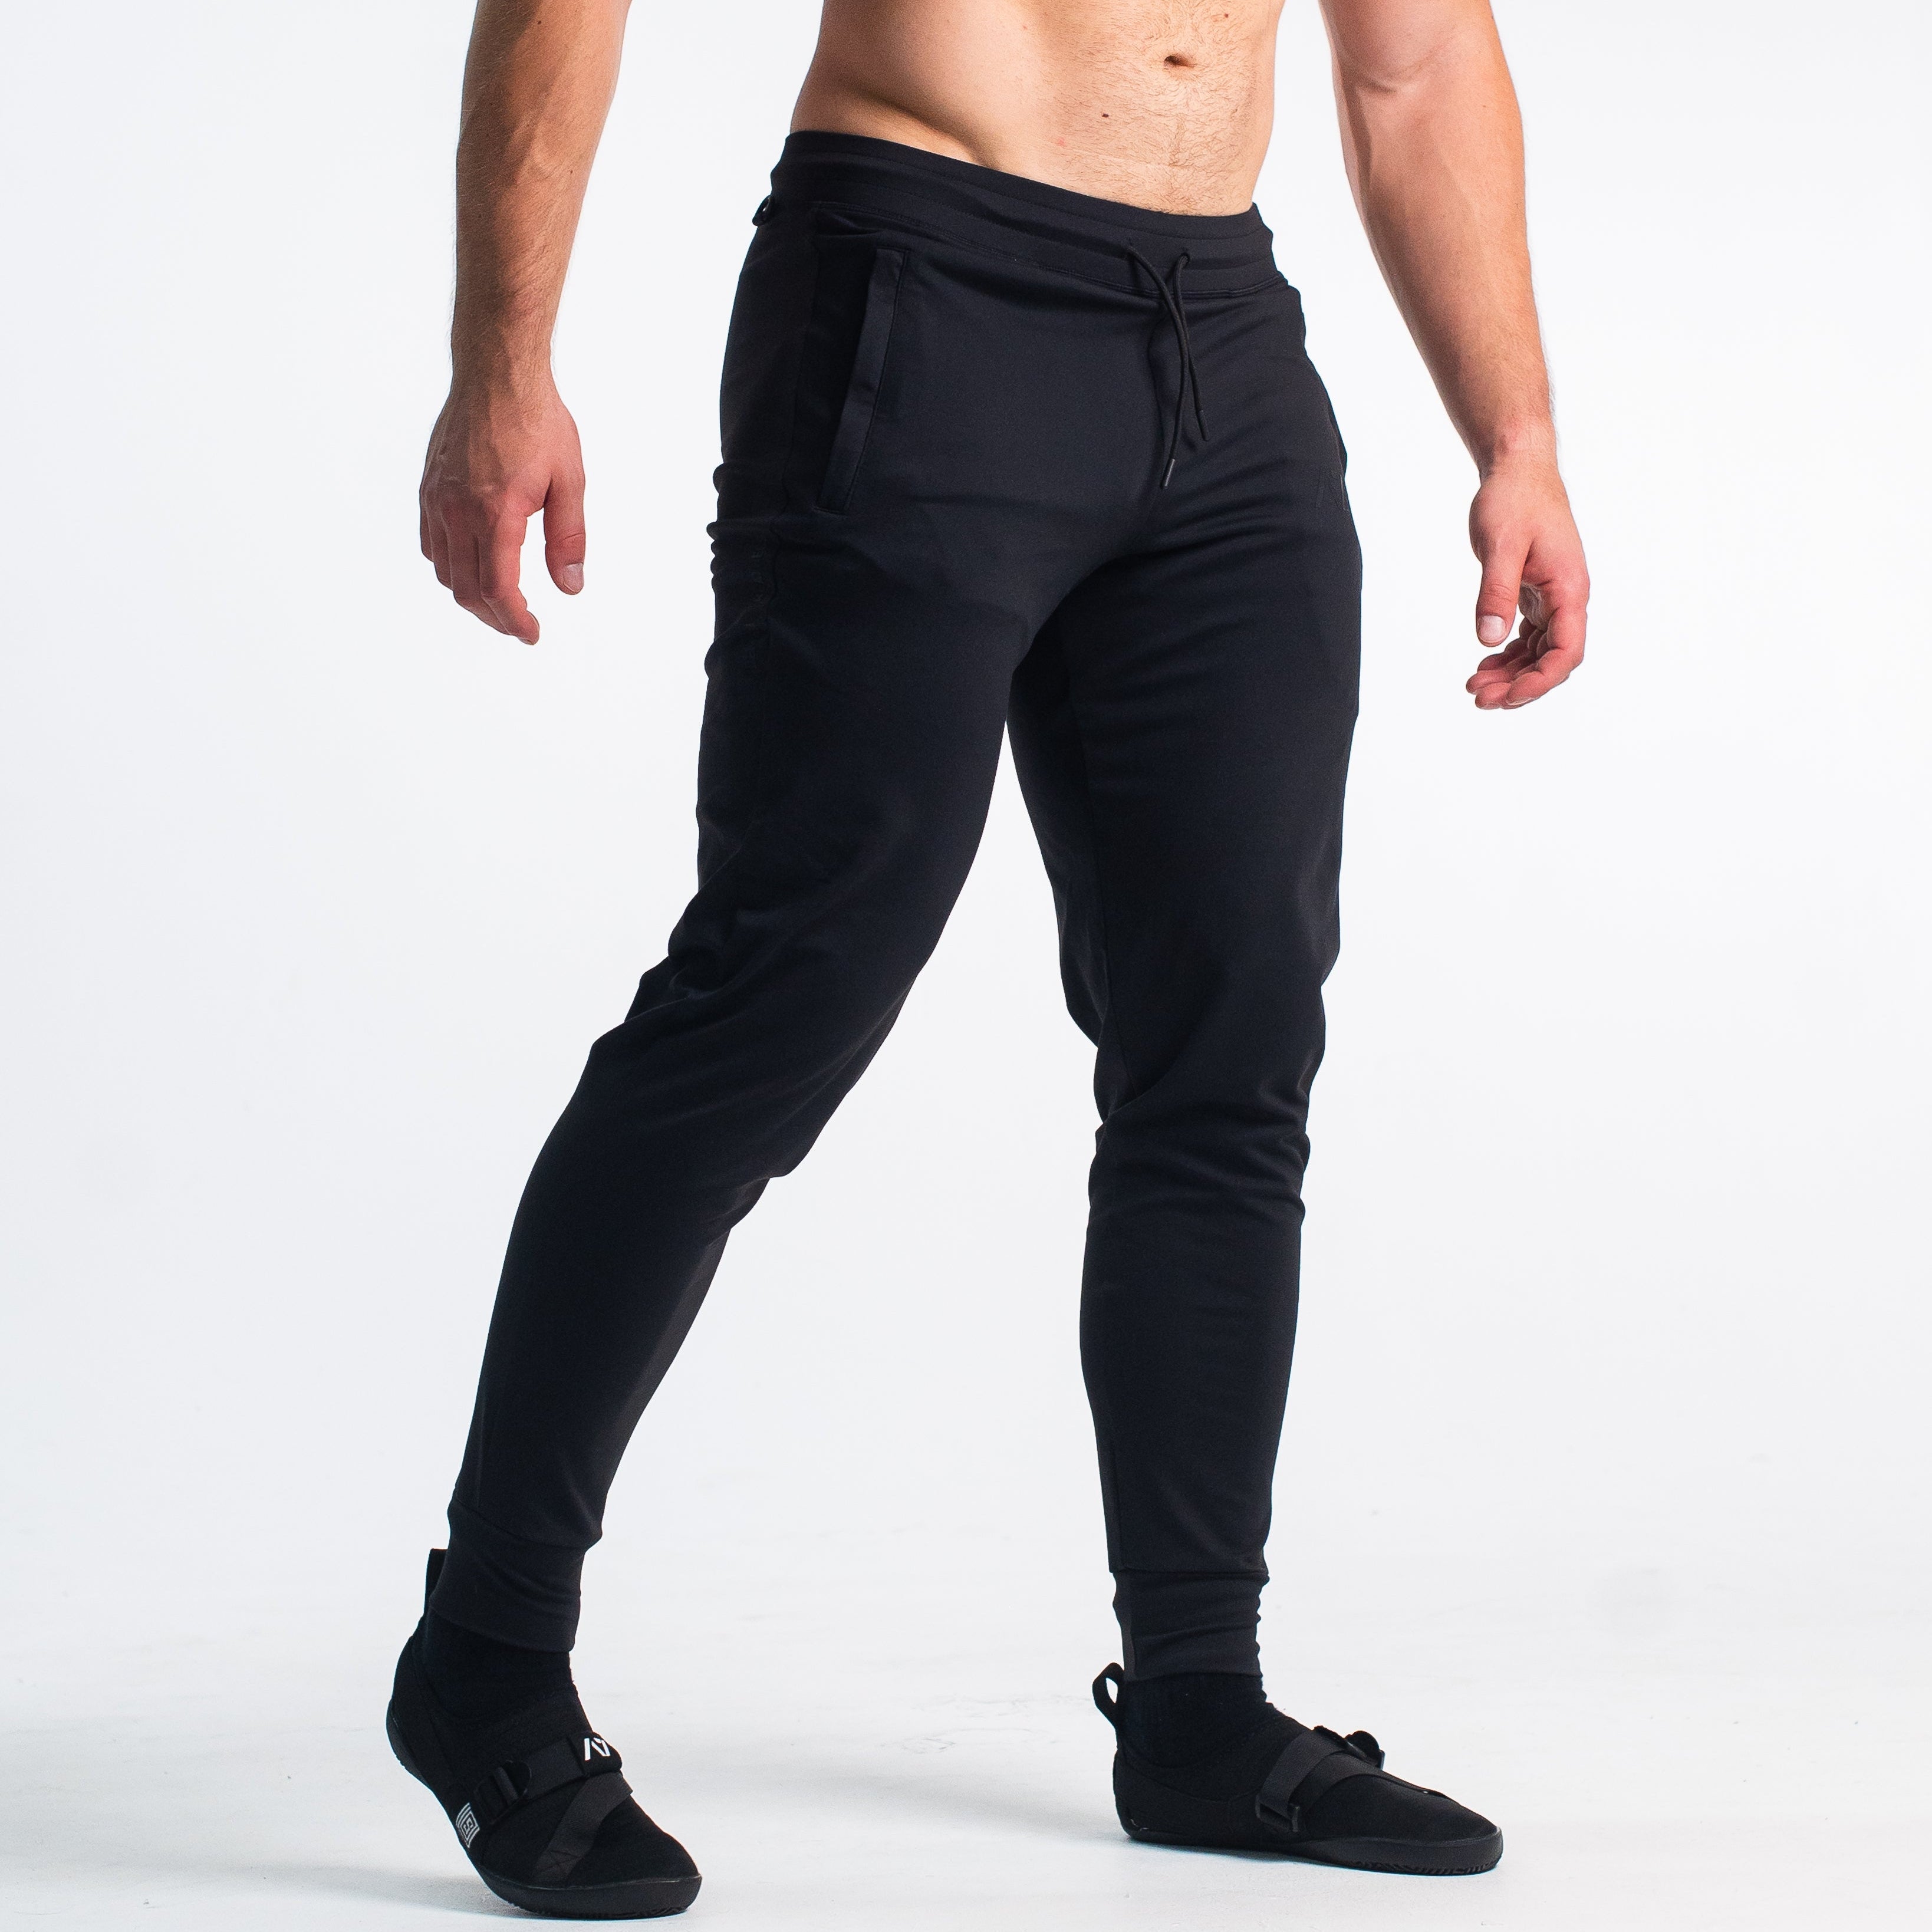 Defy joggers are just as comfortable in the gym as they are going out. These are made with premium moisture-wicking 4-way-stretch material for greater range of motion. These are a great fit for both men and women and offer deep zippered pockets and tapered leg design. Purchase Stealth Defy Joggers from A7 UK shipping to UK or A7 Europe shipping to EU.